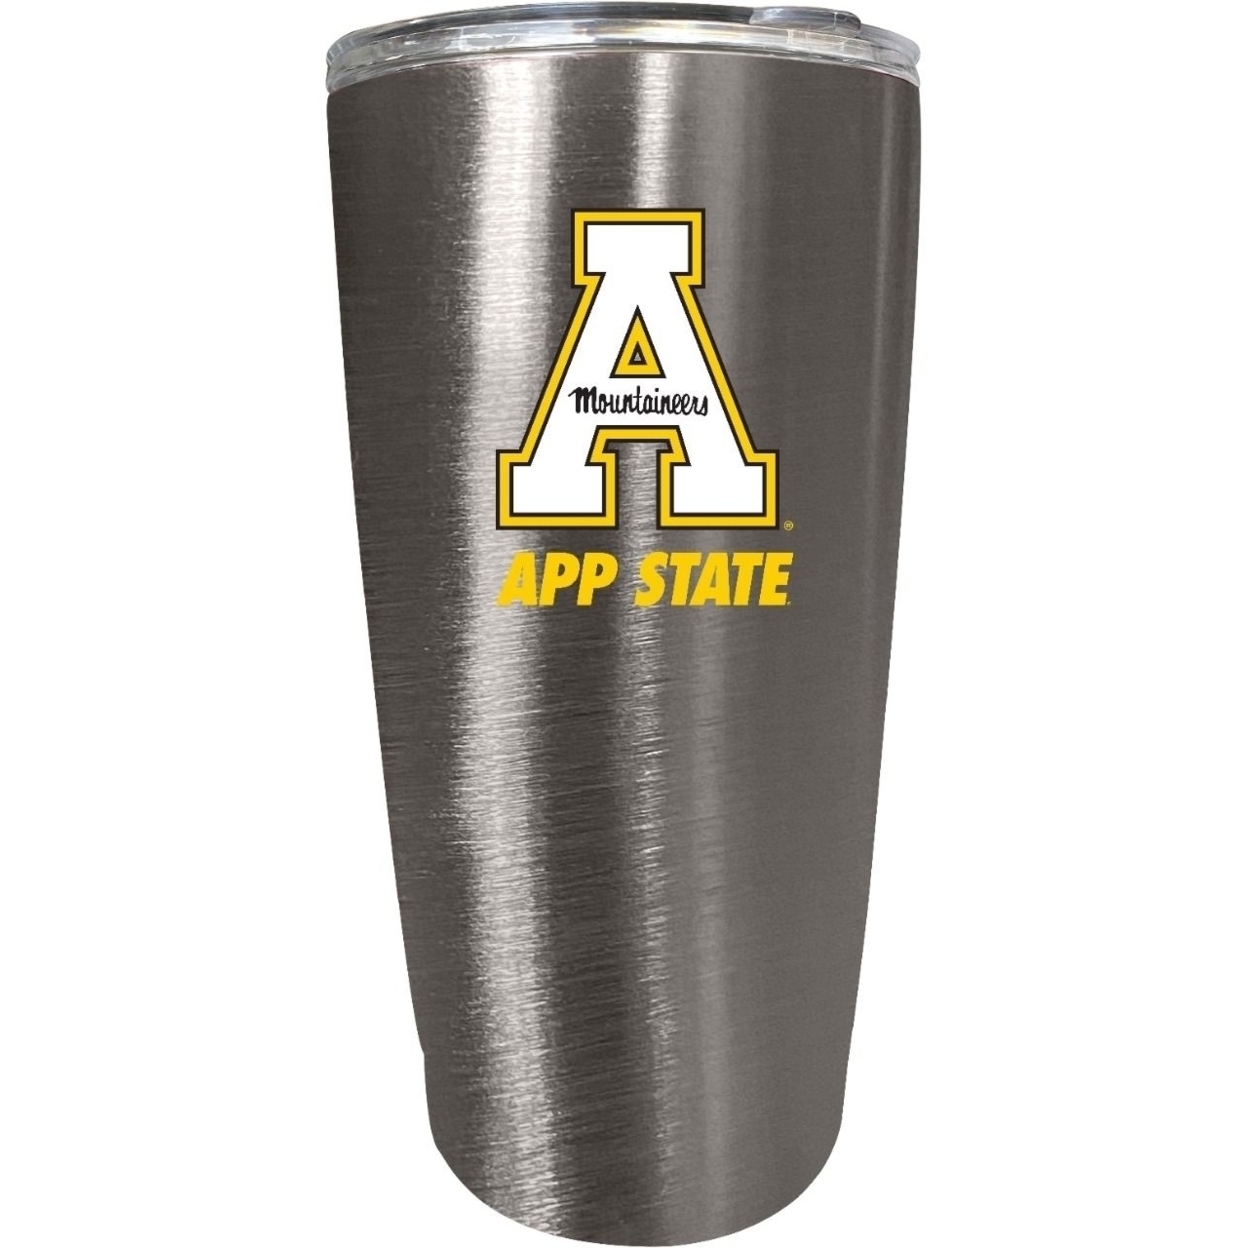 Appalachian State 16 Oz Insulated Stainless Steel Tumbler Colorless